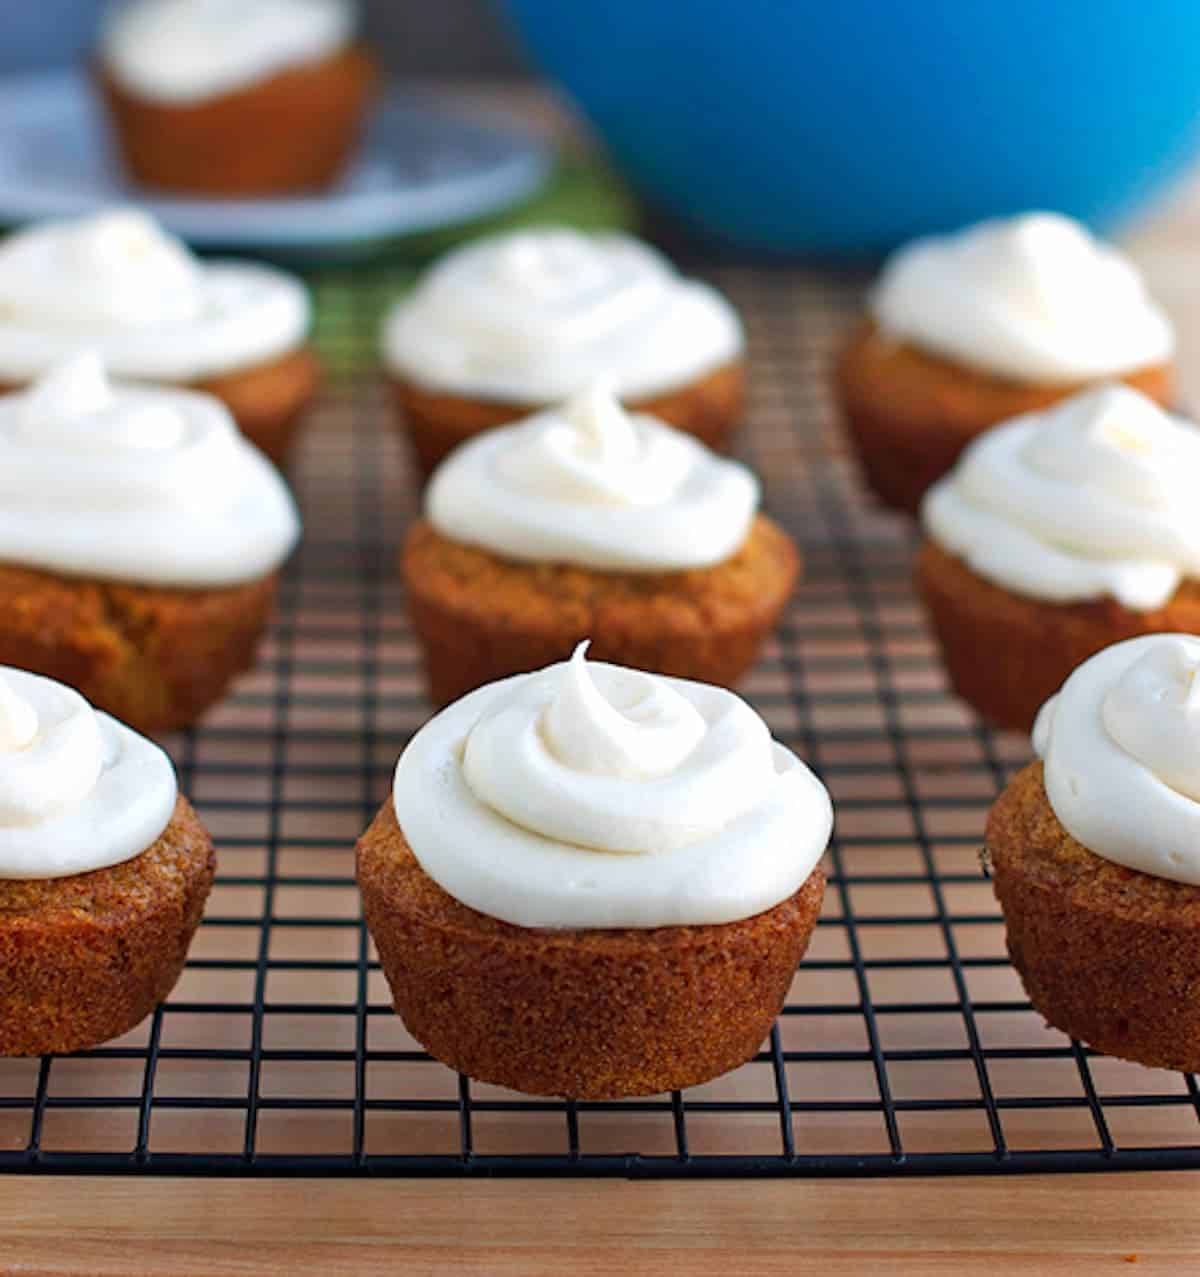 These carrot cake cupcakes are made from a small town blue ribbon recipe. Sweet, moist, dense, and perfect topped with cream cheese frosting. | pinchofyum.com